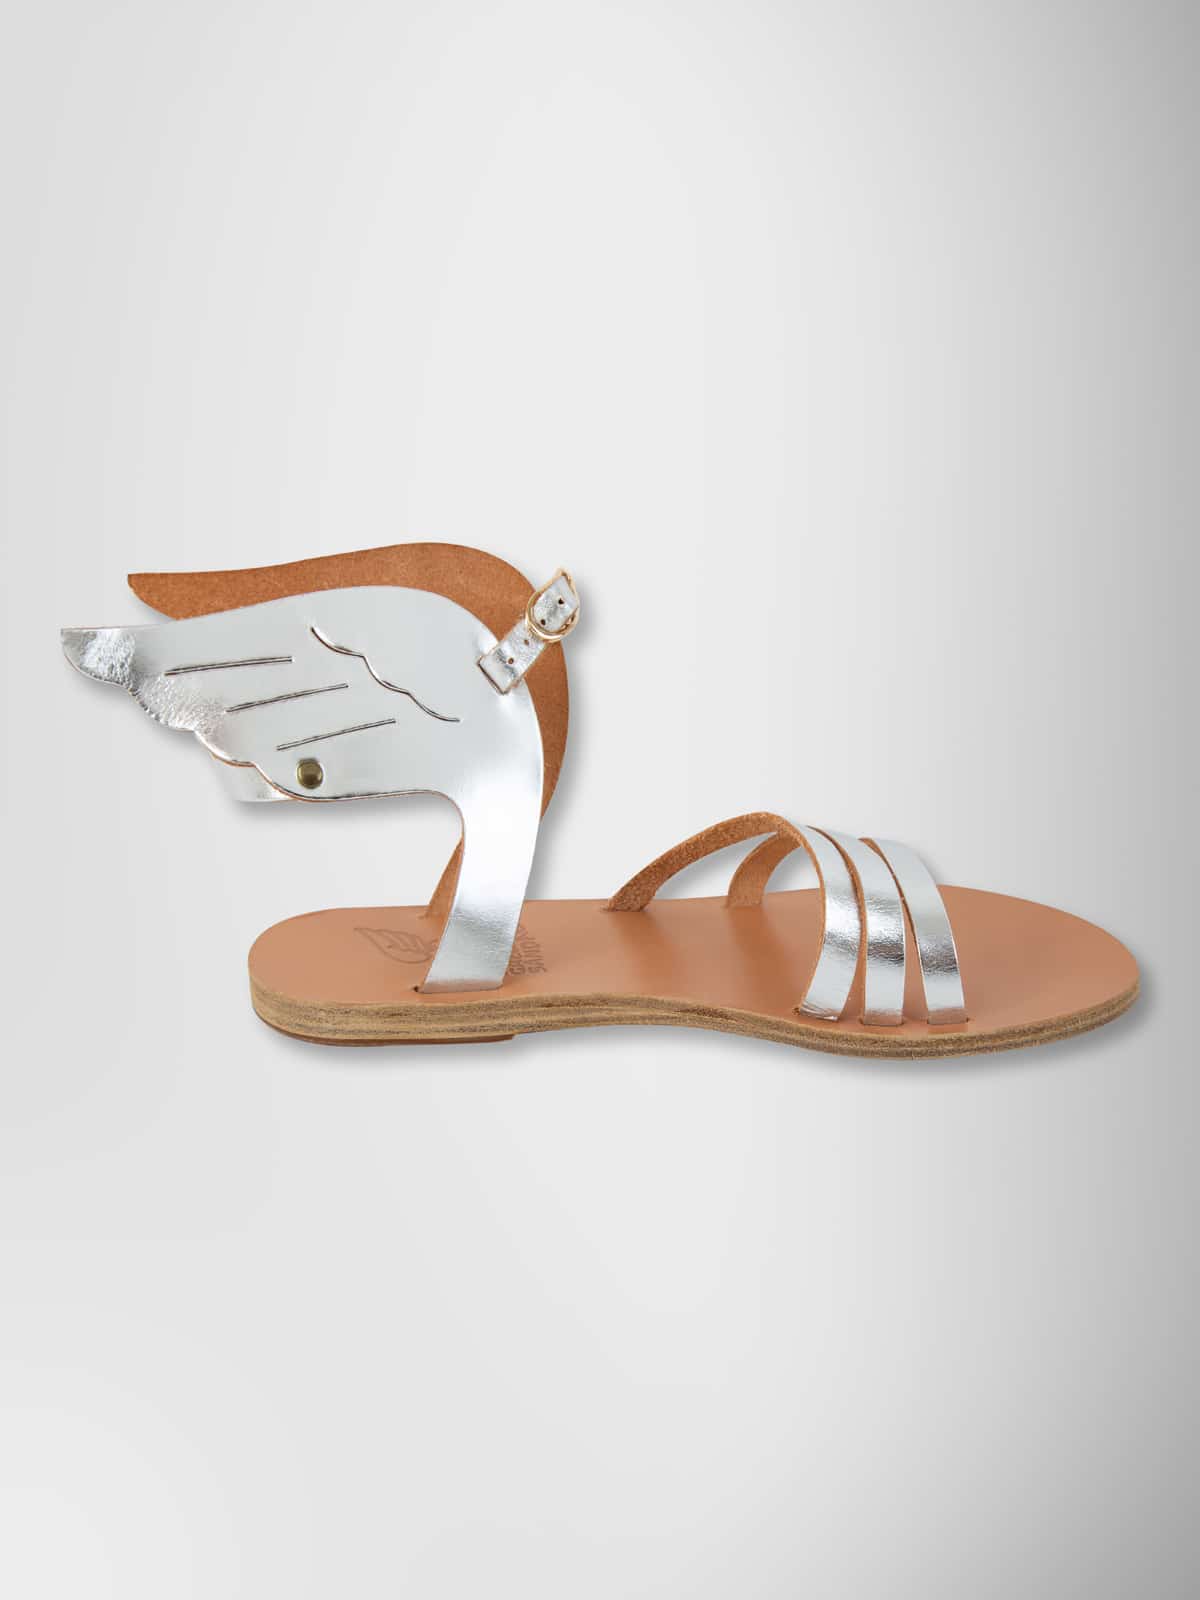 SANDALS "IKARIA" IN SILVER LEATHER